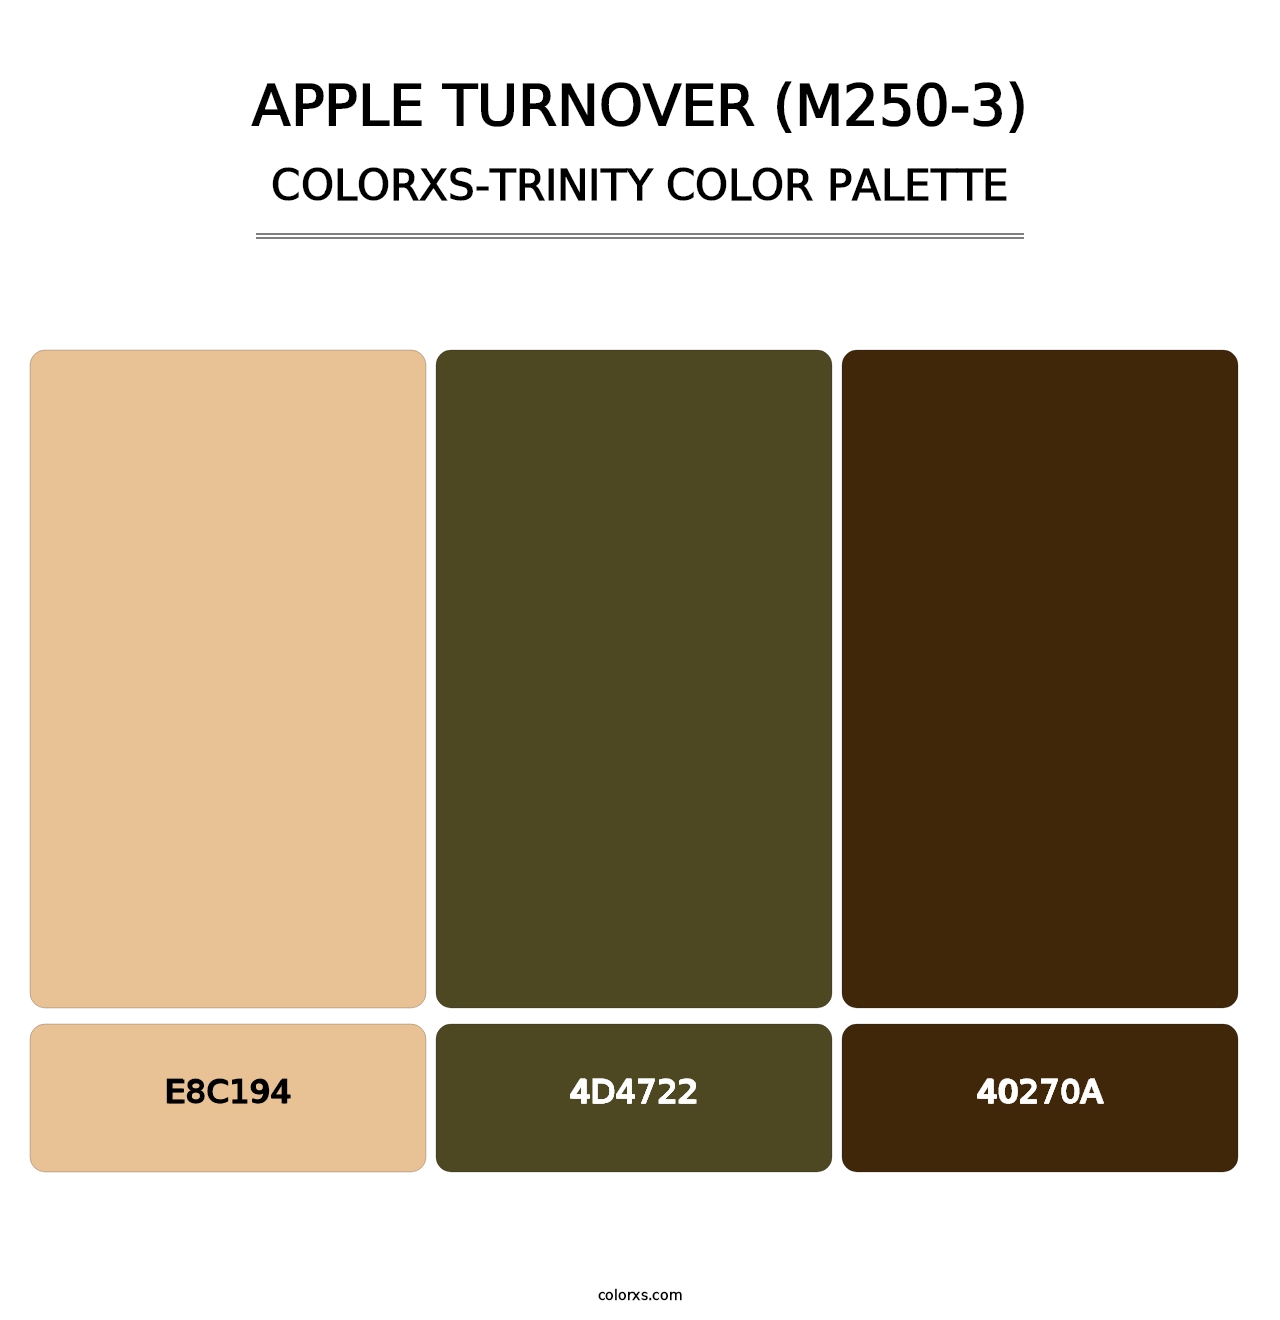 Apple Turnover (M250-3) - Colorxs Trinity Palette